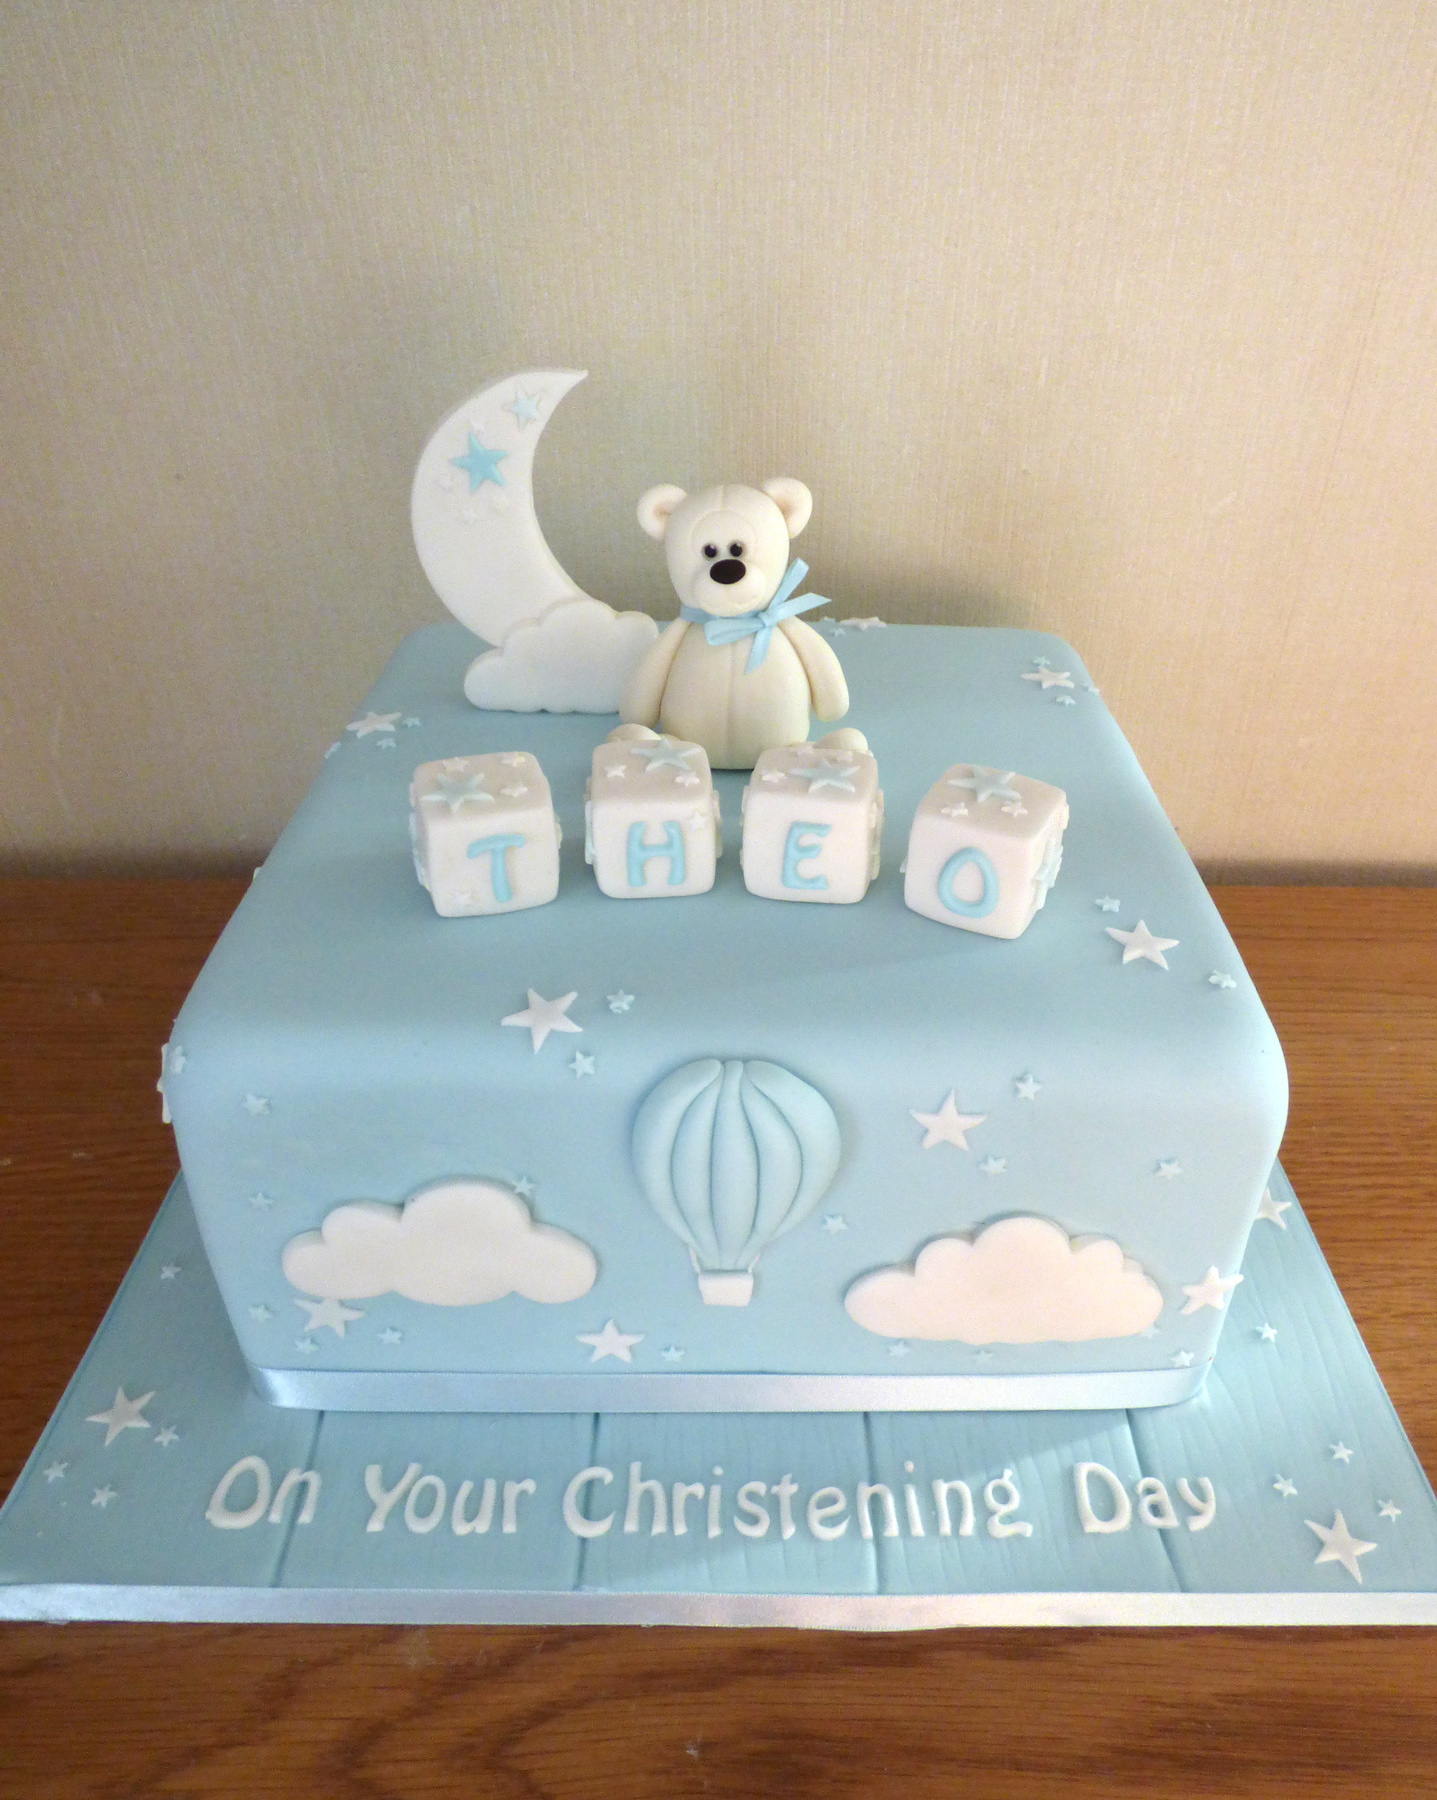 Christening Cake - Buy Online, Free UK Delivery — New Cakes